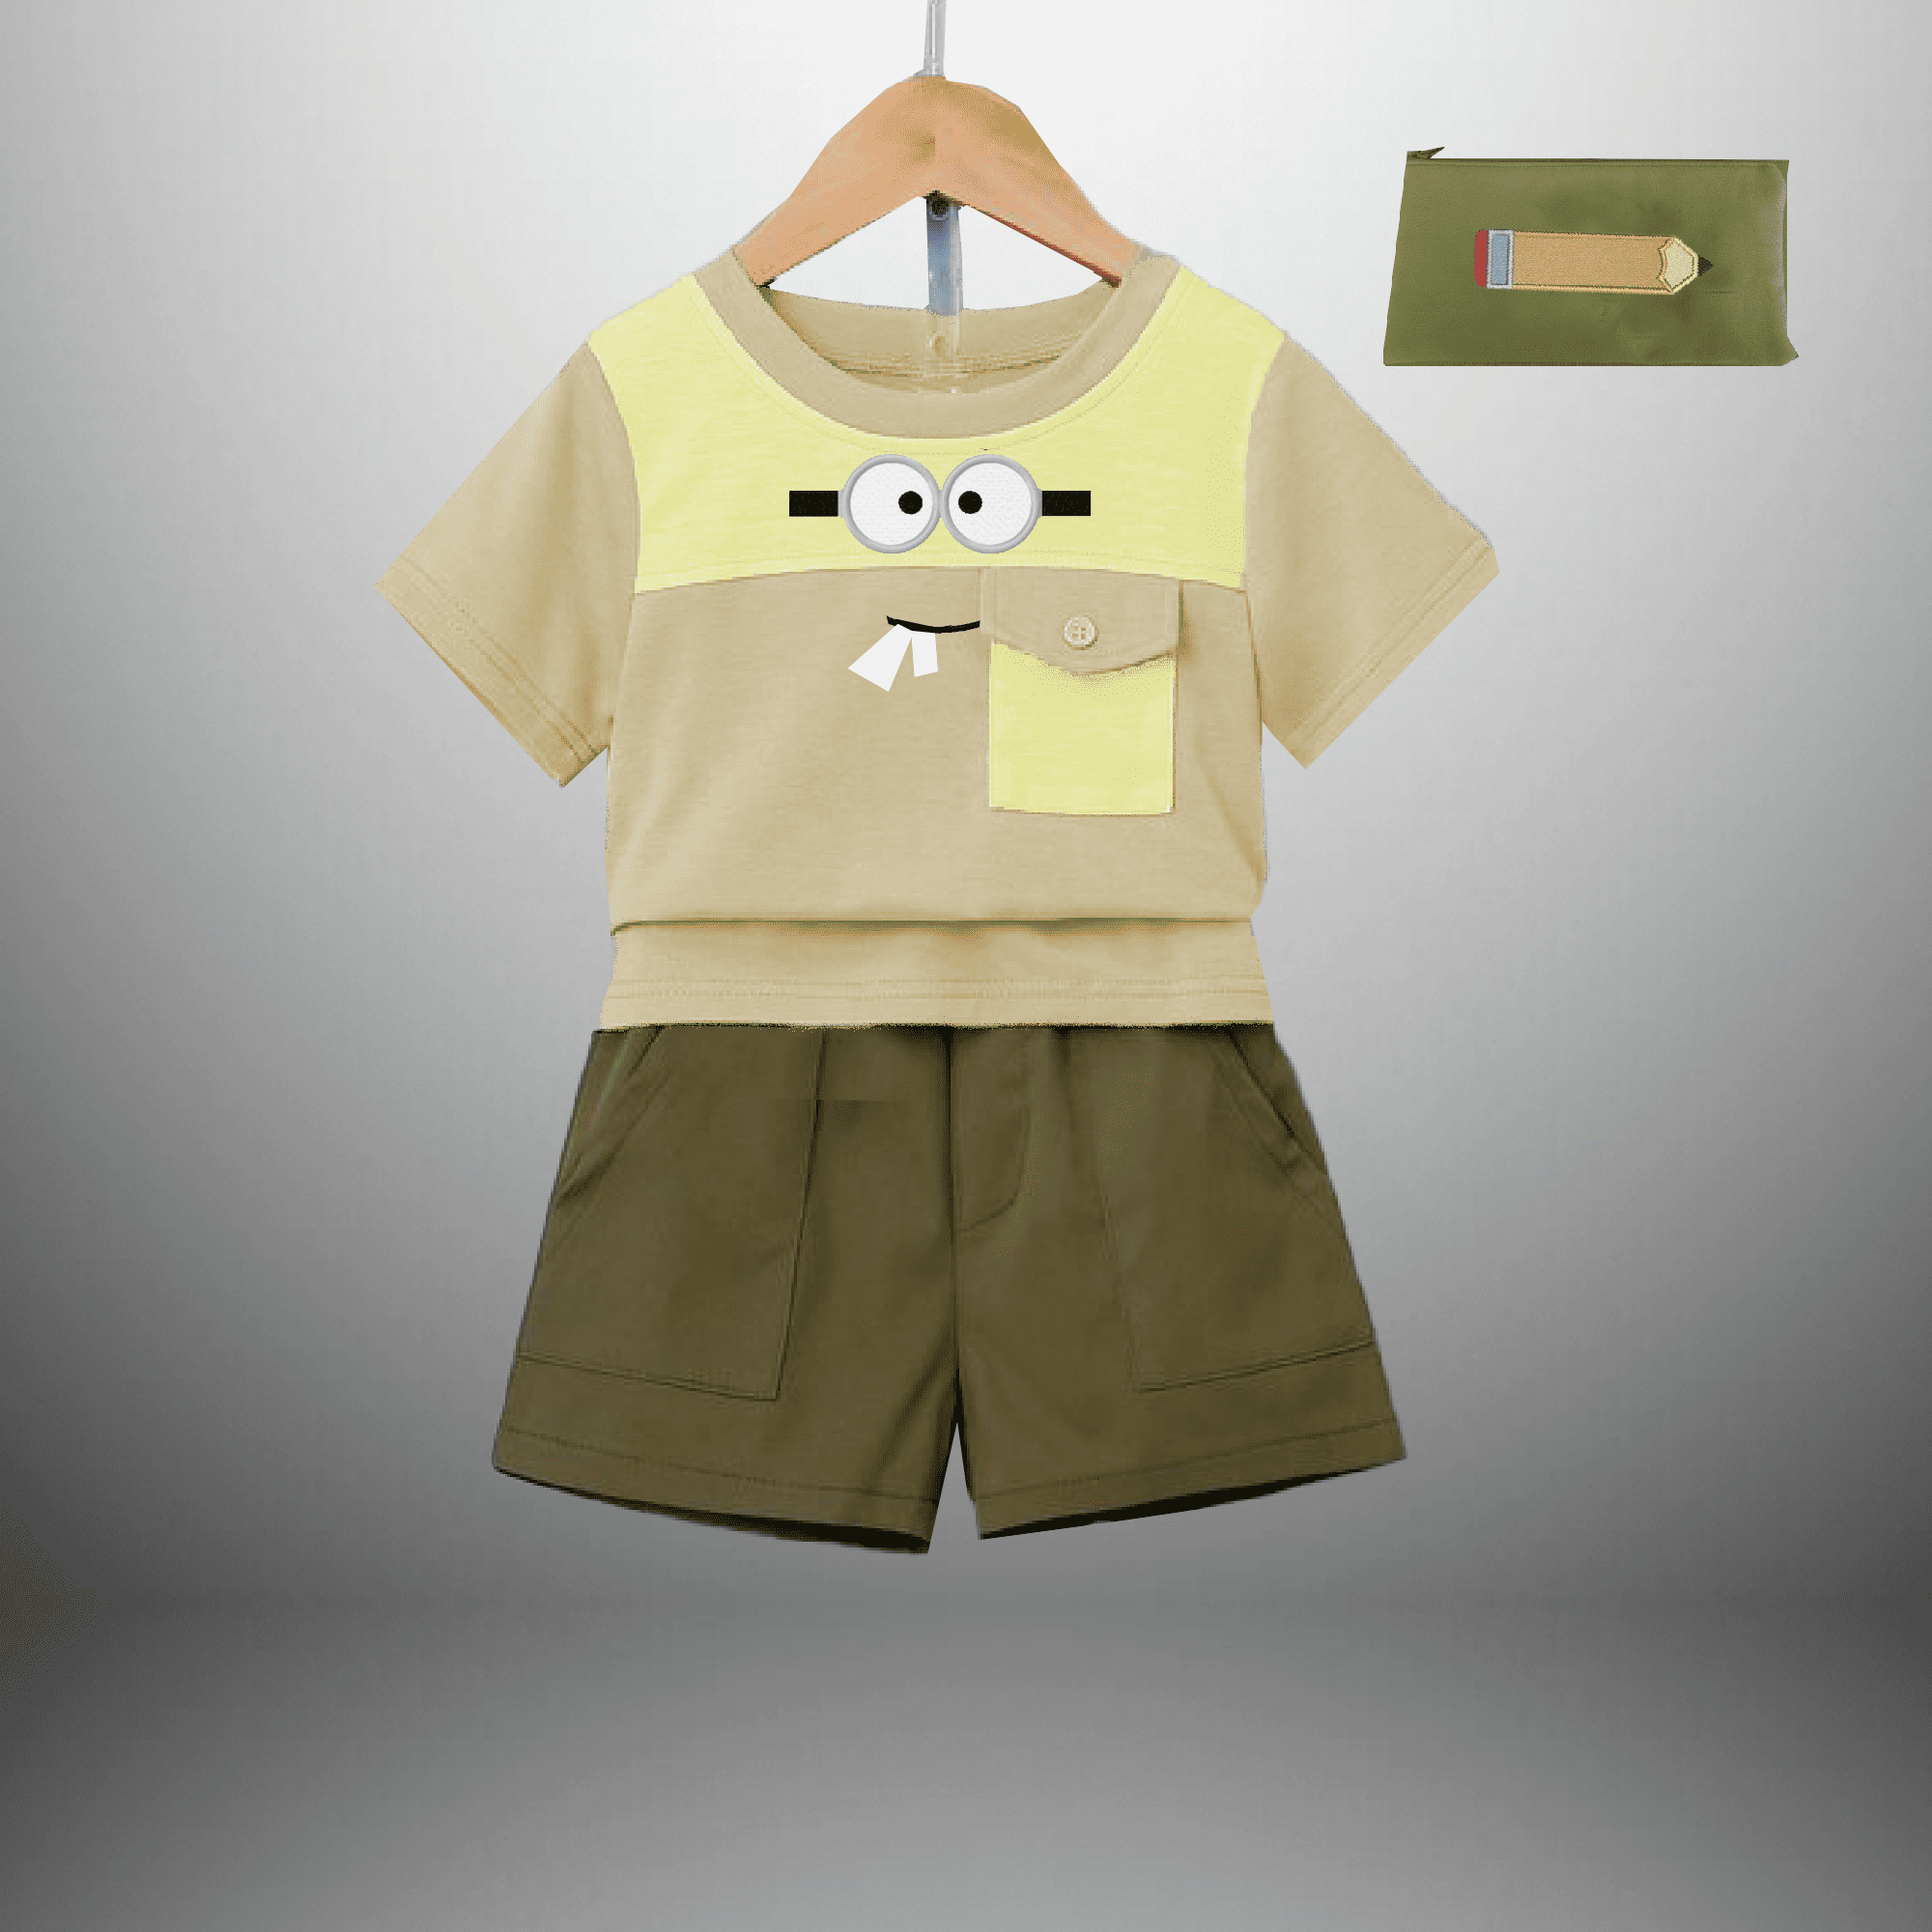 Boy's 2 piece set of color blocked t-shirt and shorts with a free pencil box-RKFCW490